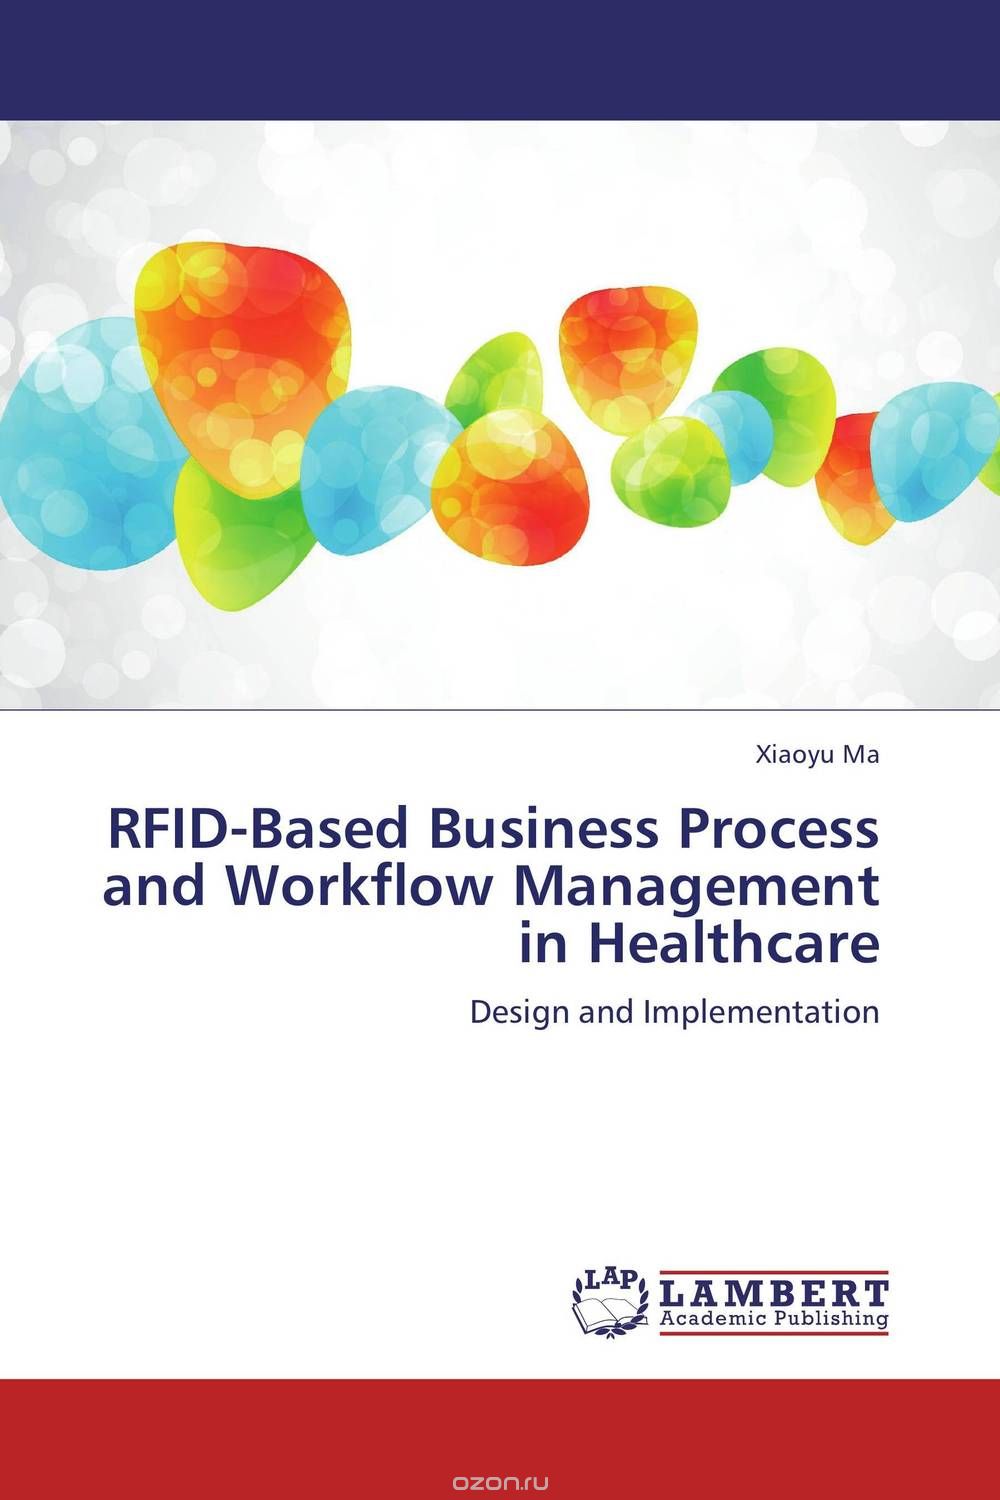 RFID-Based Business Process and Workflow Management in Healthcare